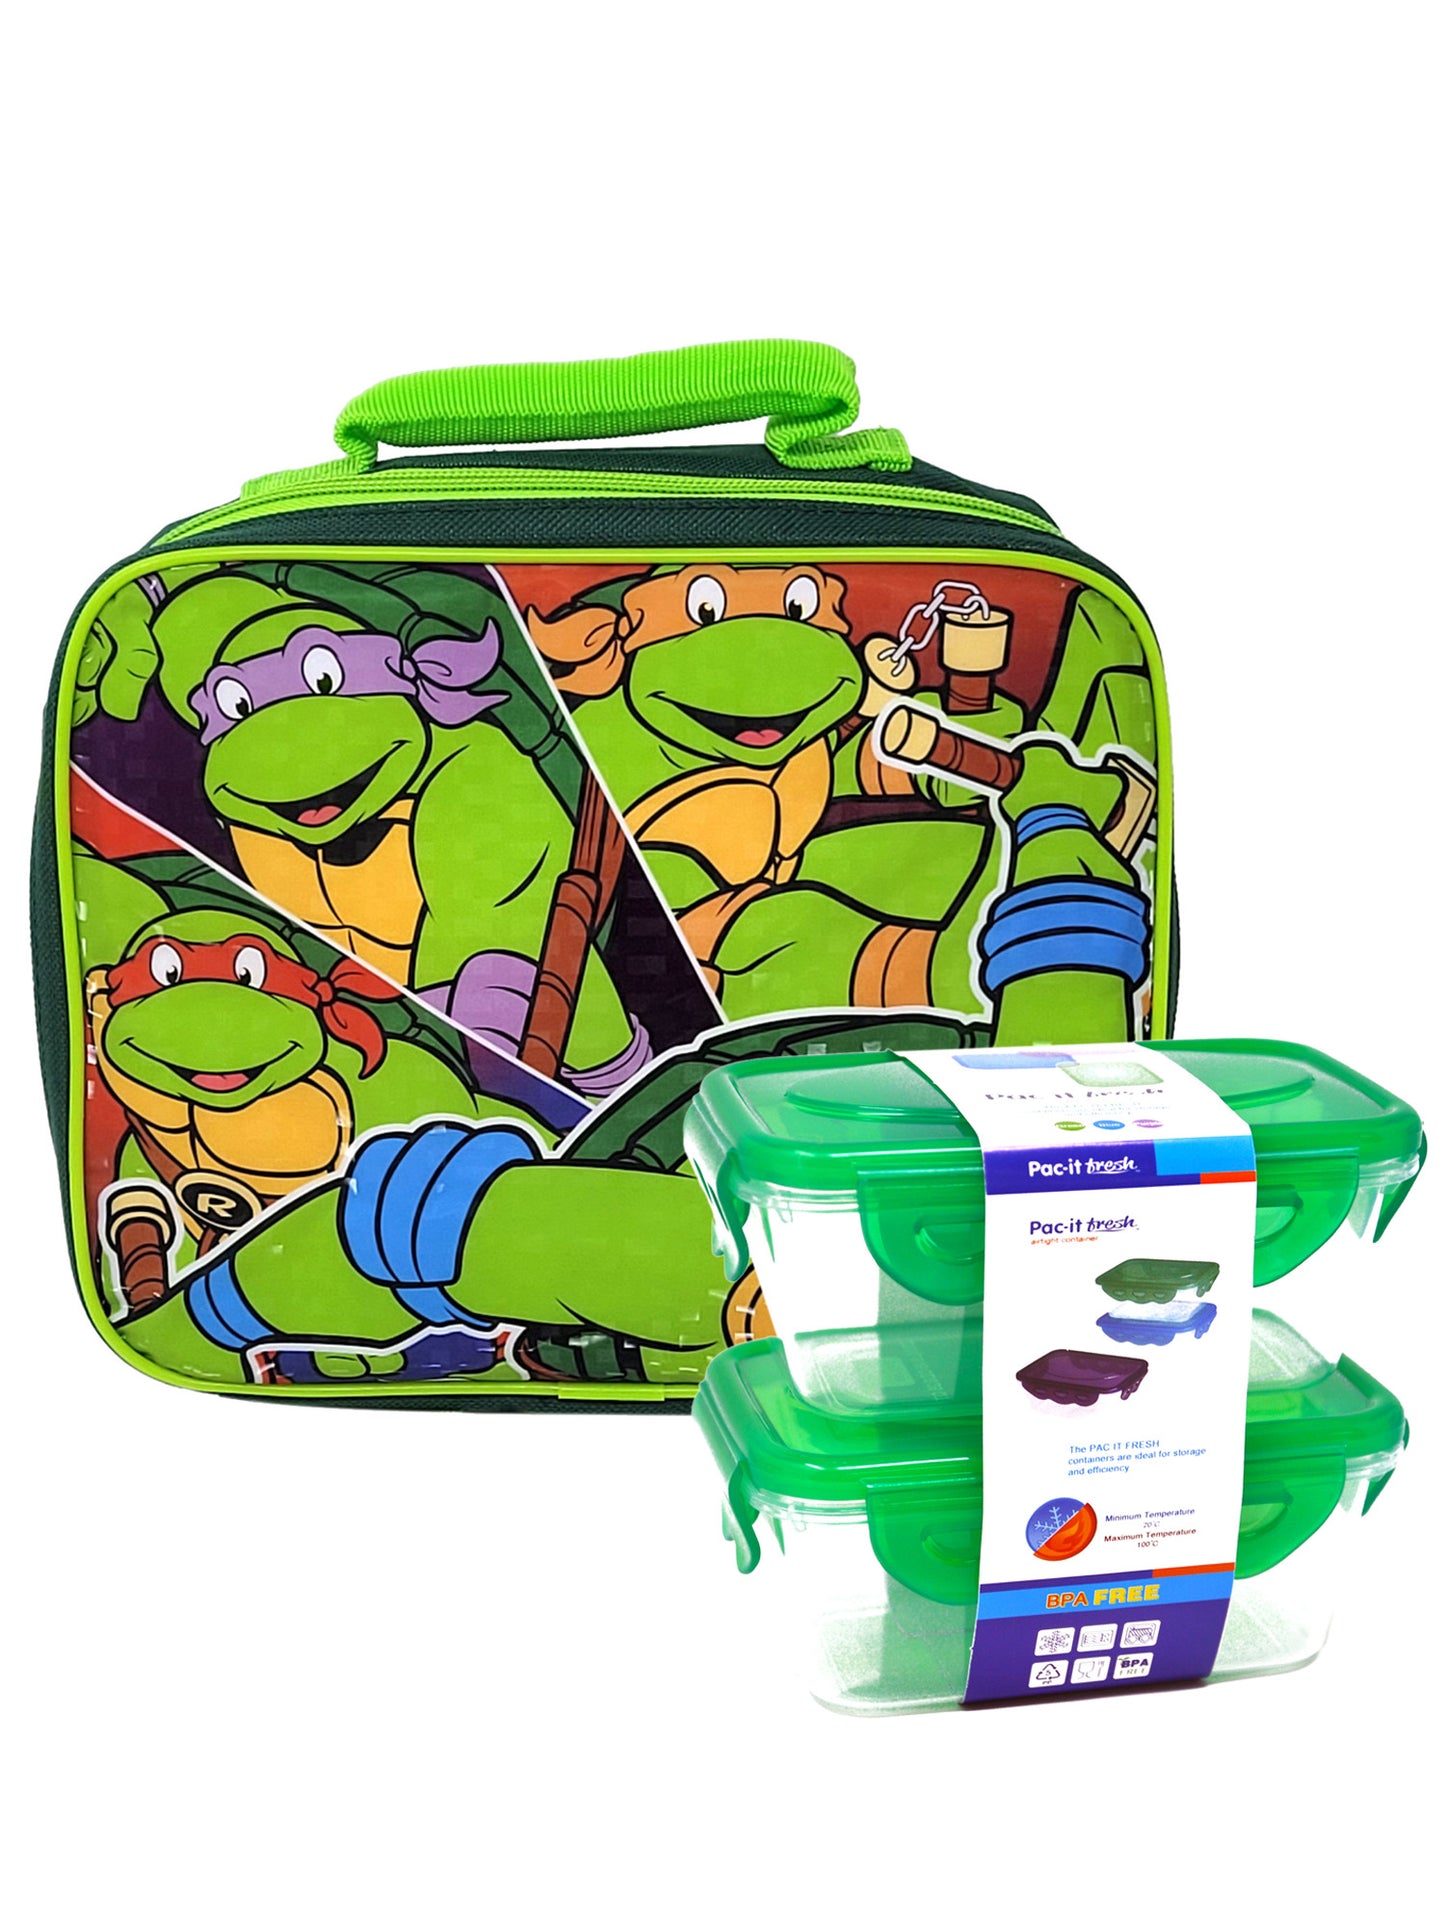 Teenage Mutant Ninja Turtles Insulated Lunch Bag & 2-Piece Snack Container Set